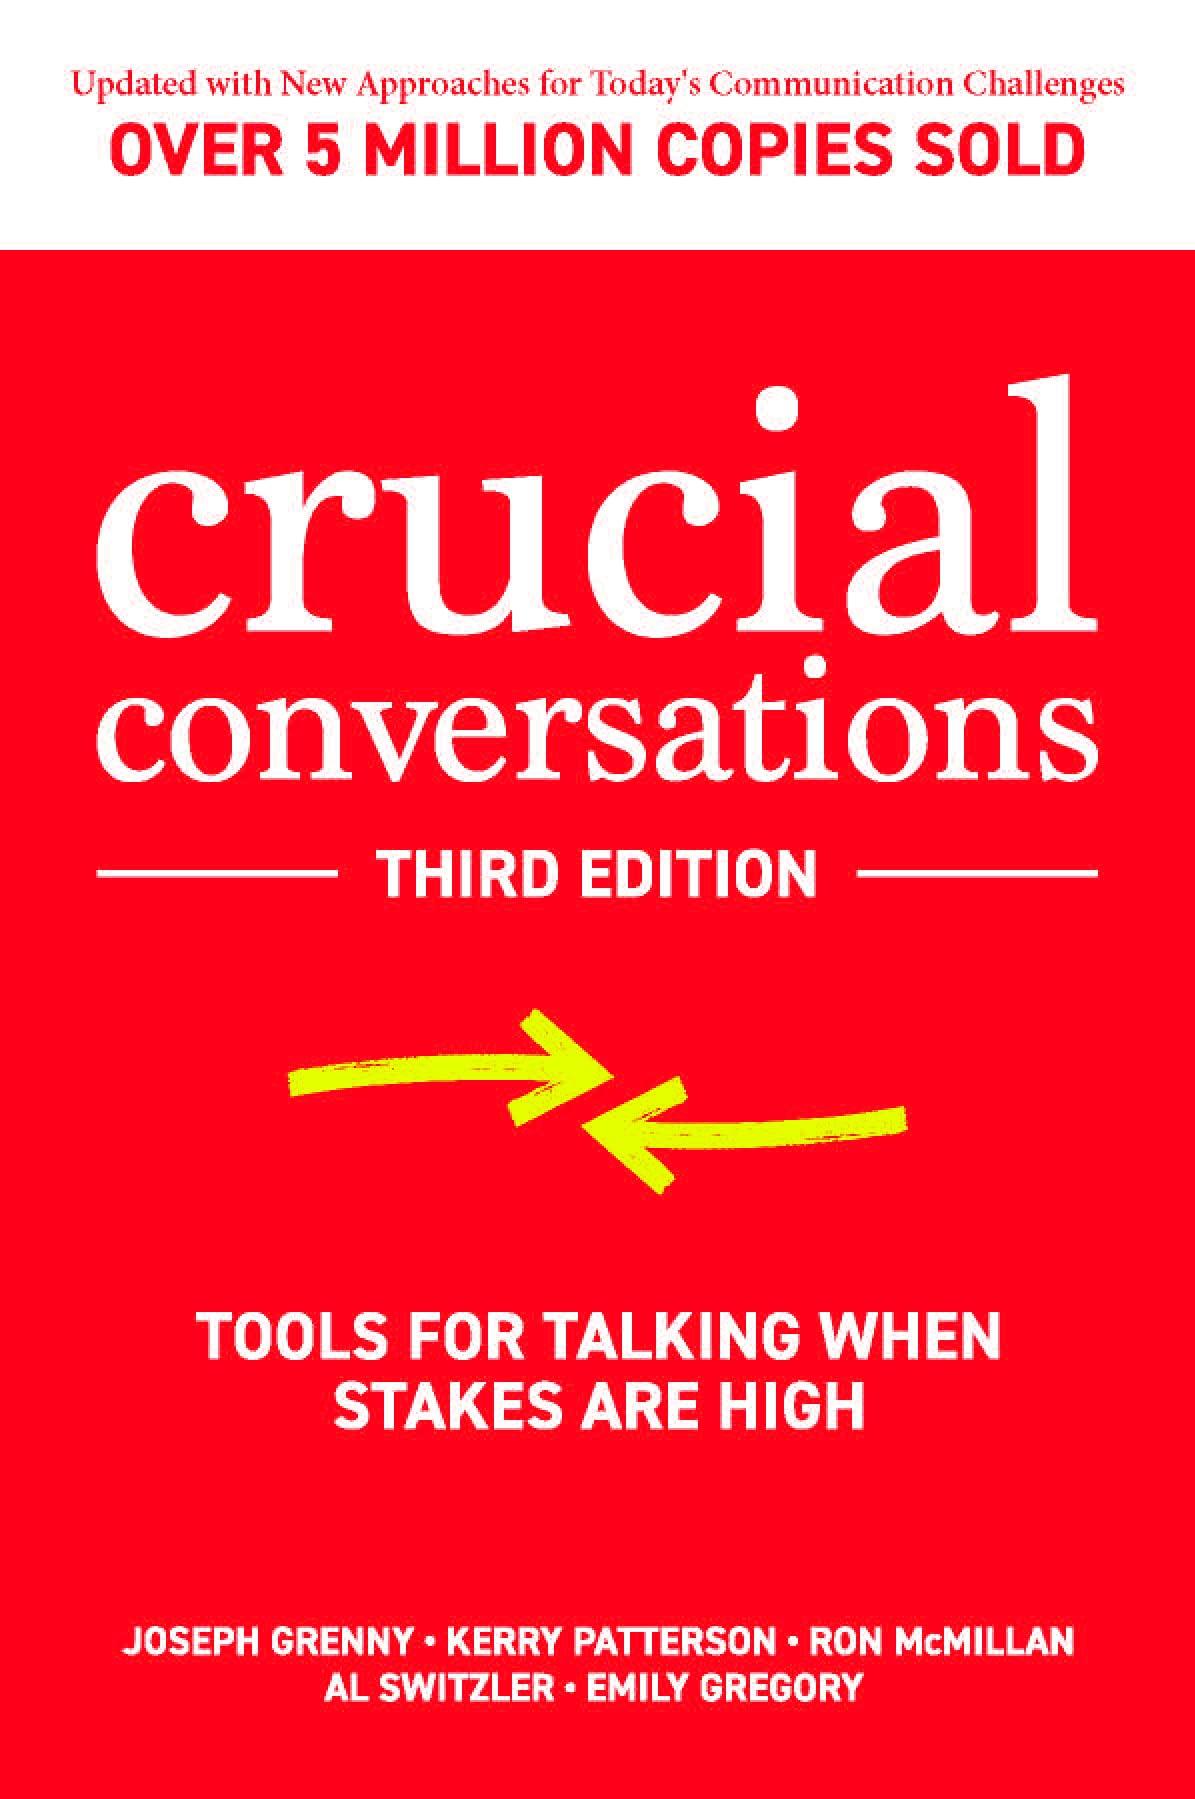 crucial conversations tools for talking when stakes are high 3rd edition joseph grenny, kerry patterson, ron